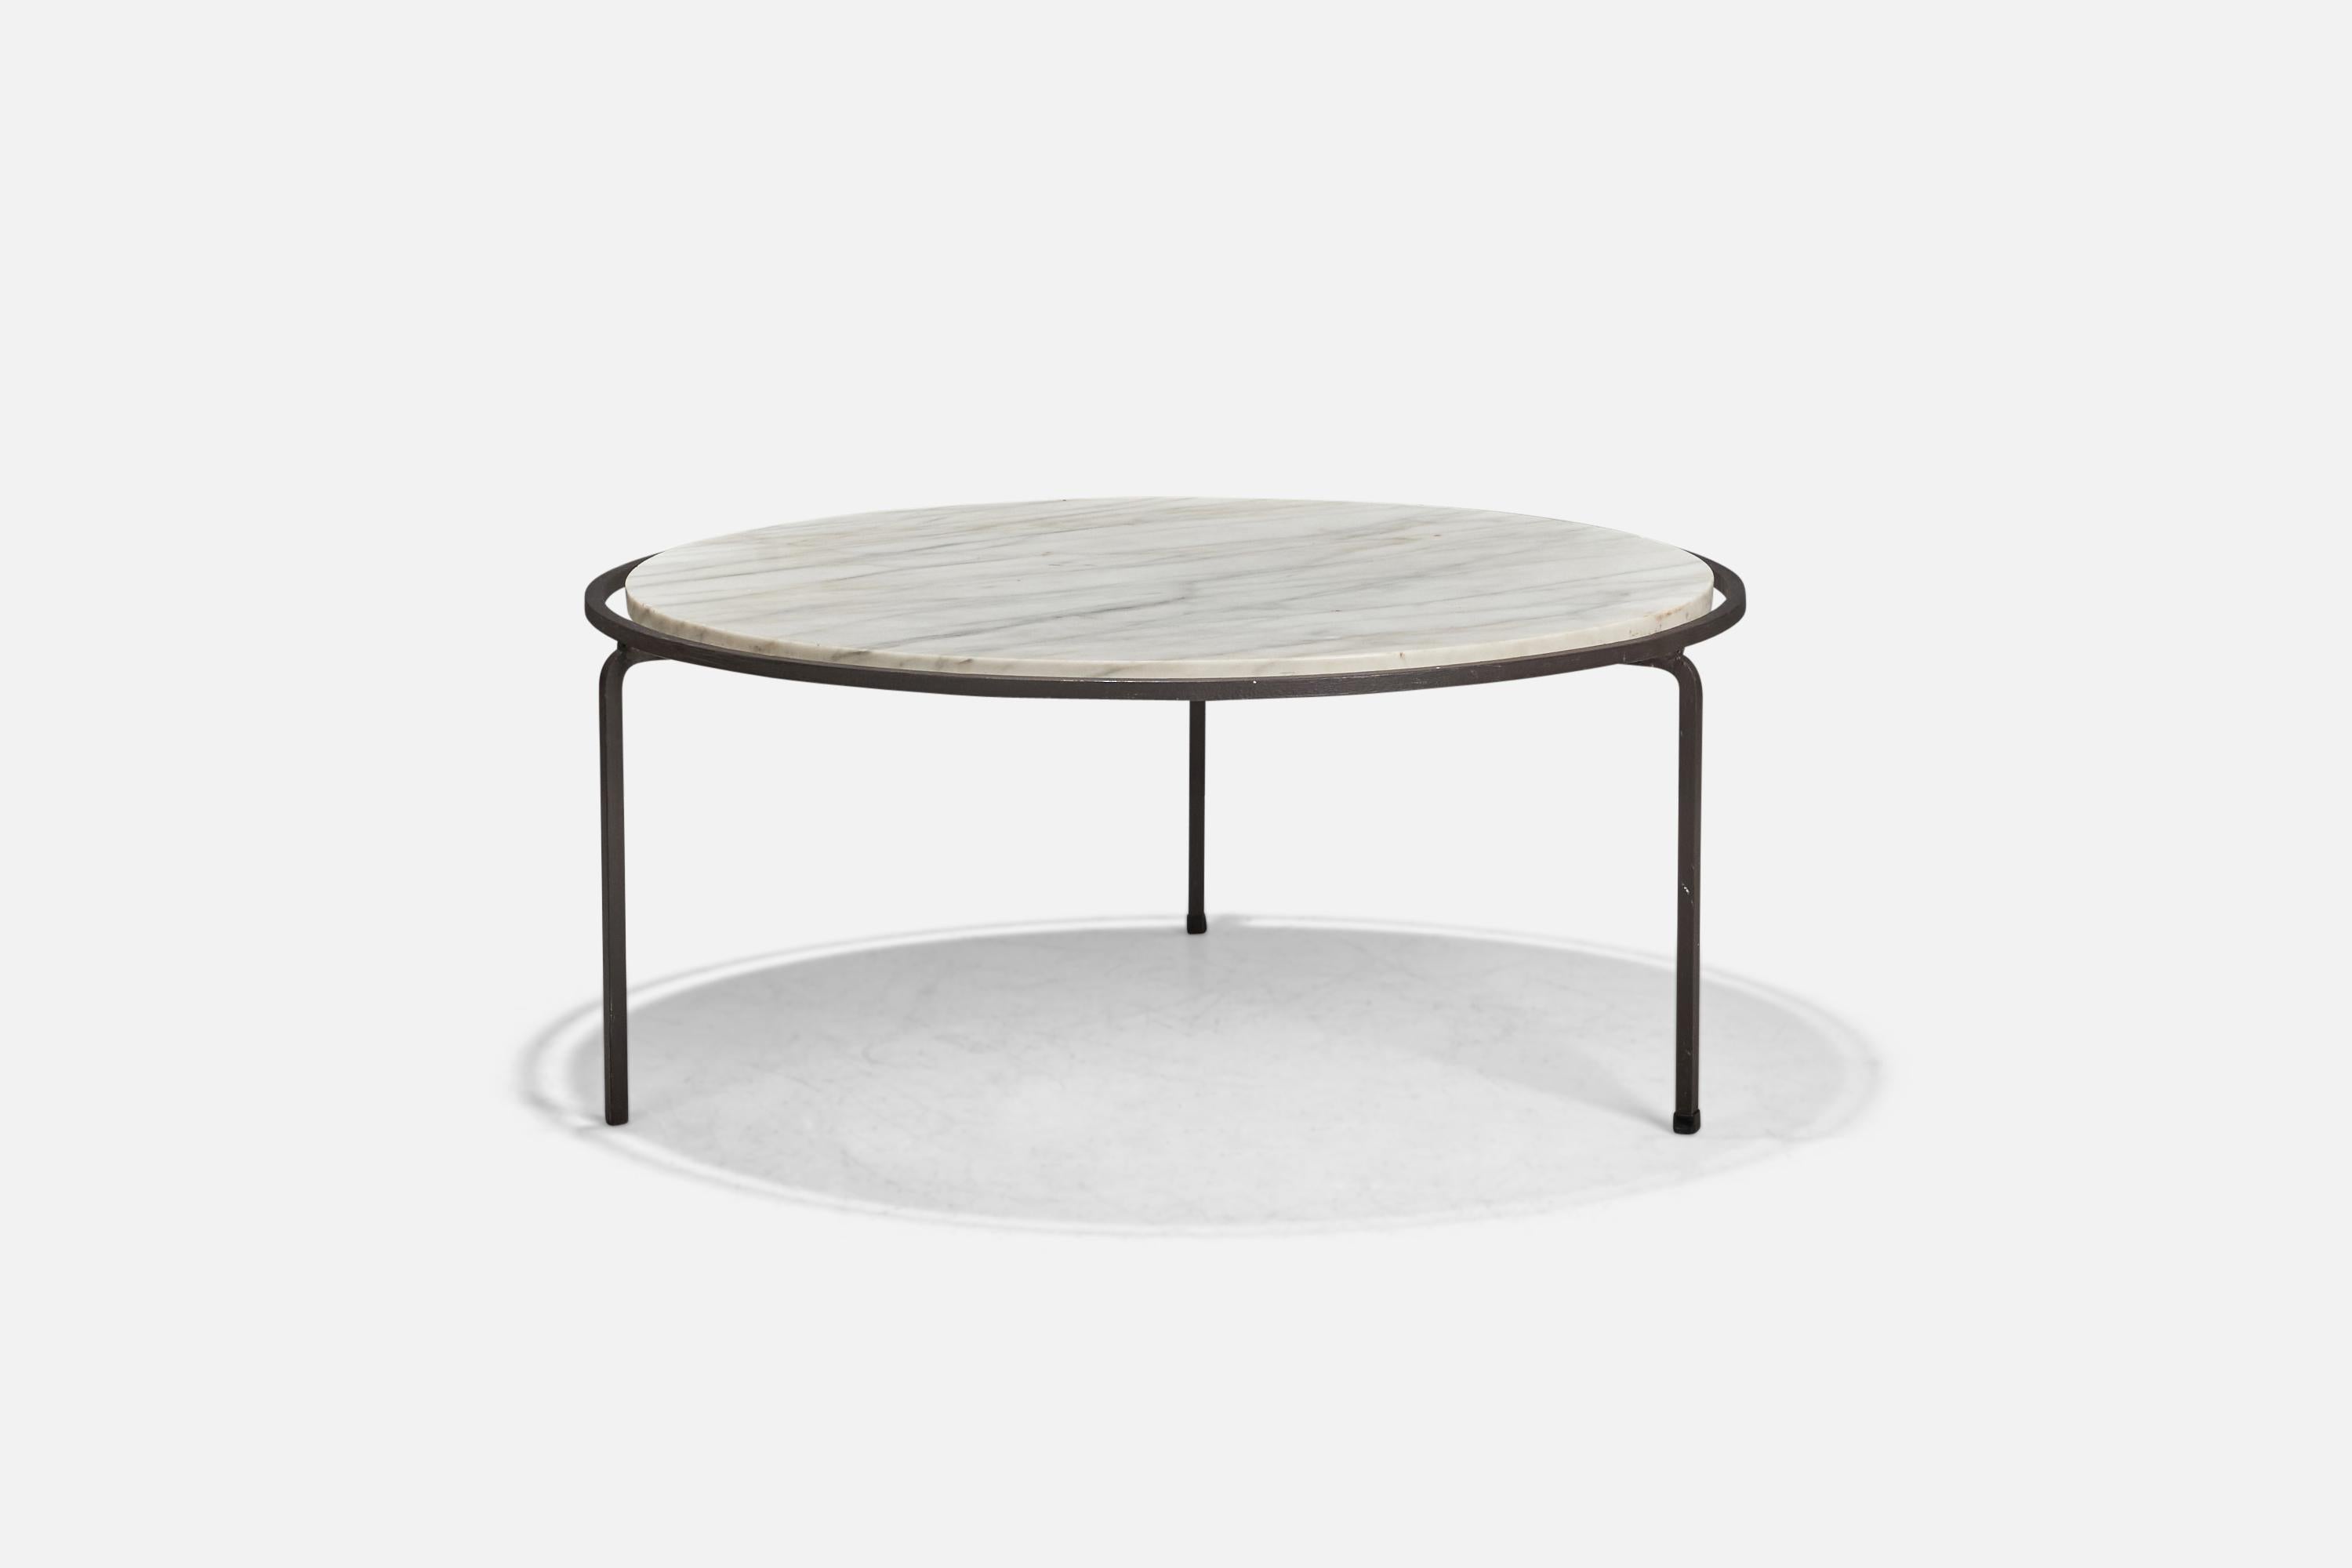 A carrara marble and black-painted iron coffee table designed by Allan Gould and produced by Reilly-Wolff Associates, USA, 1950s.

